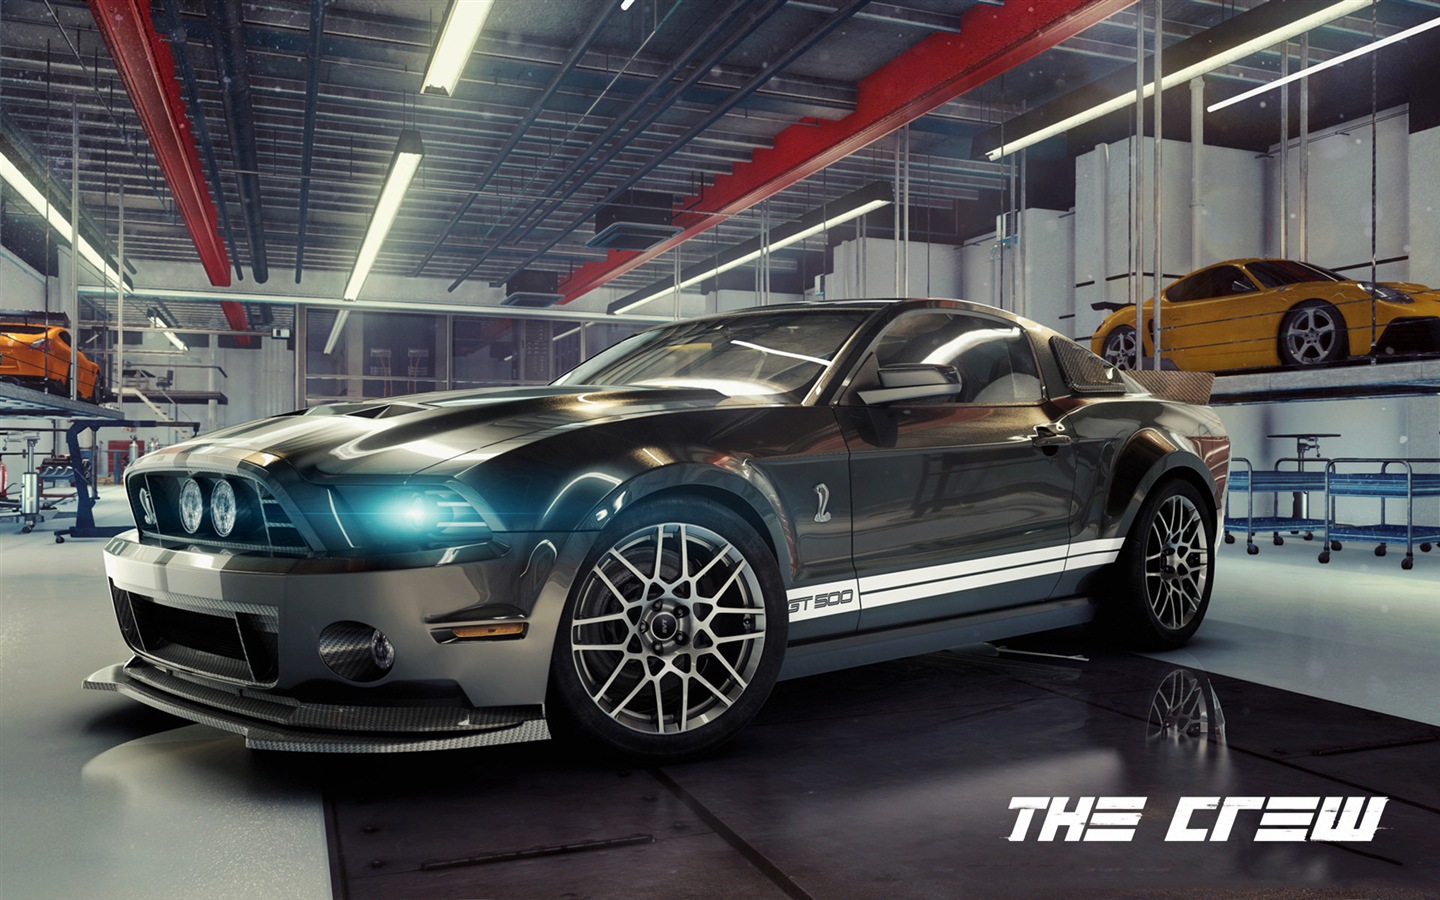 The Crew game HD wallpapers #11 - 1440x900